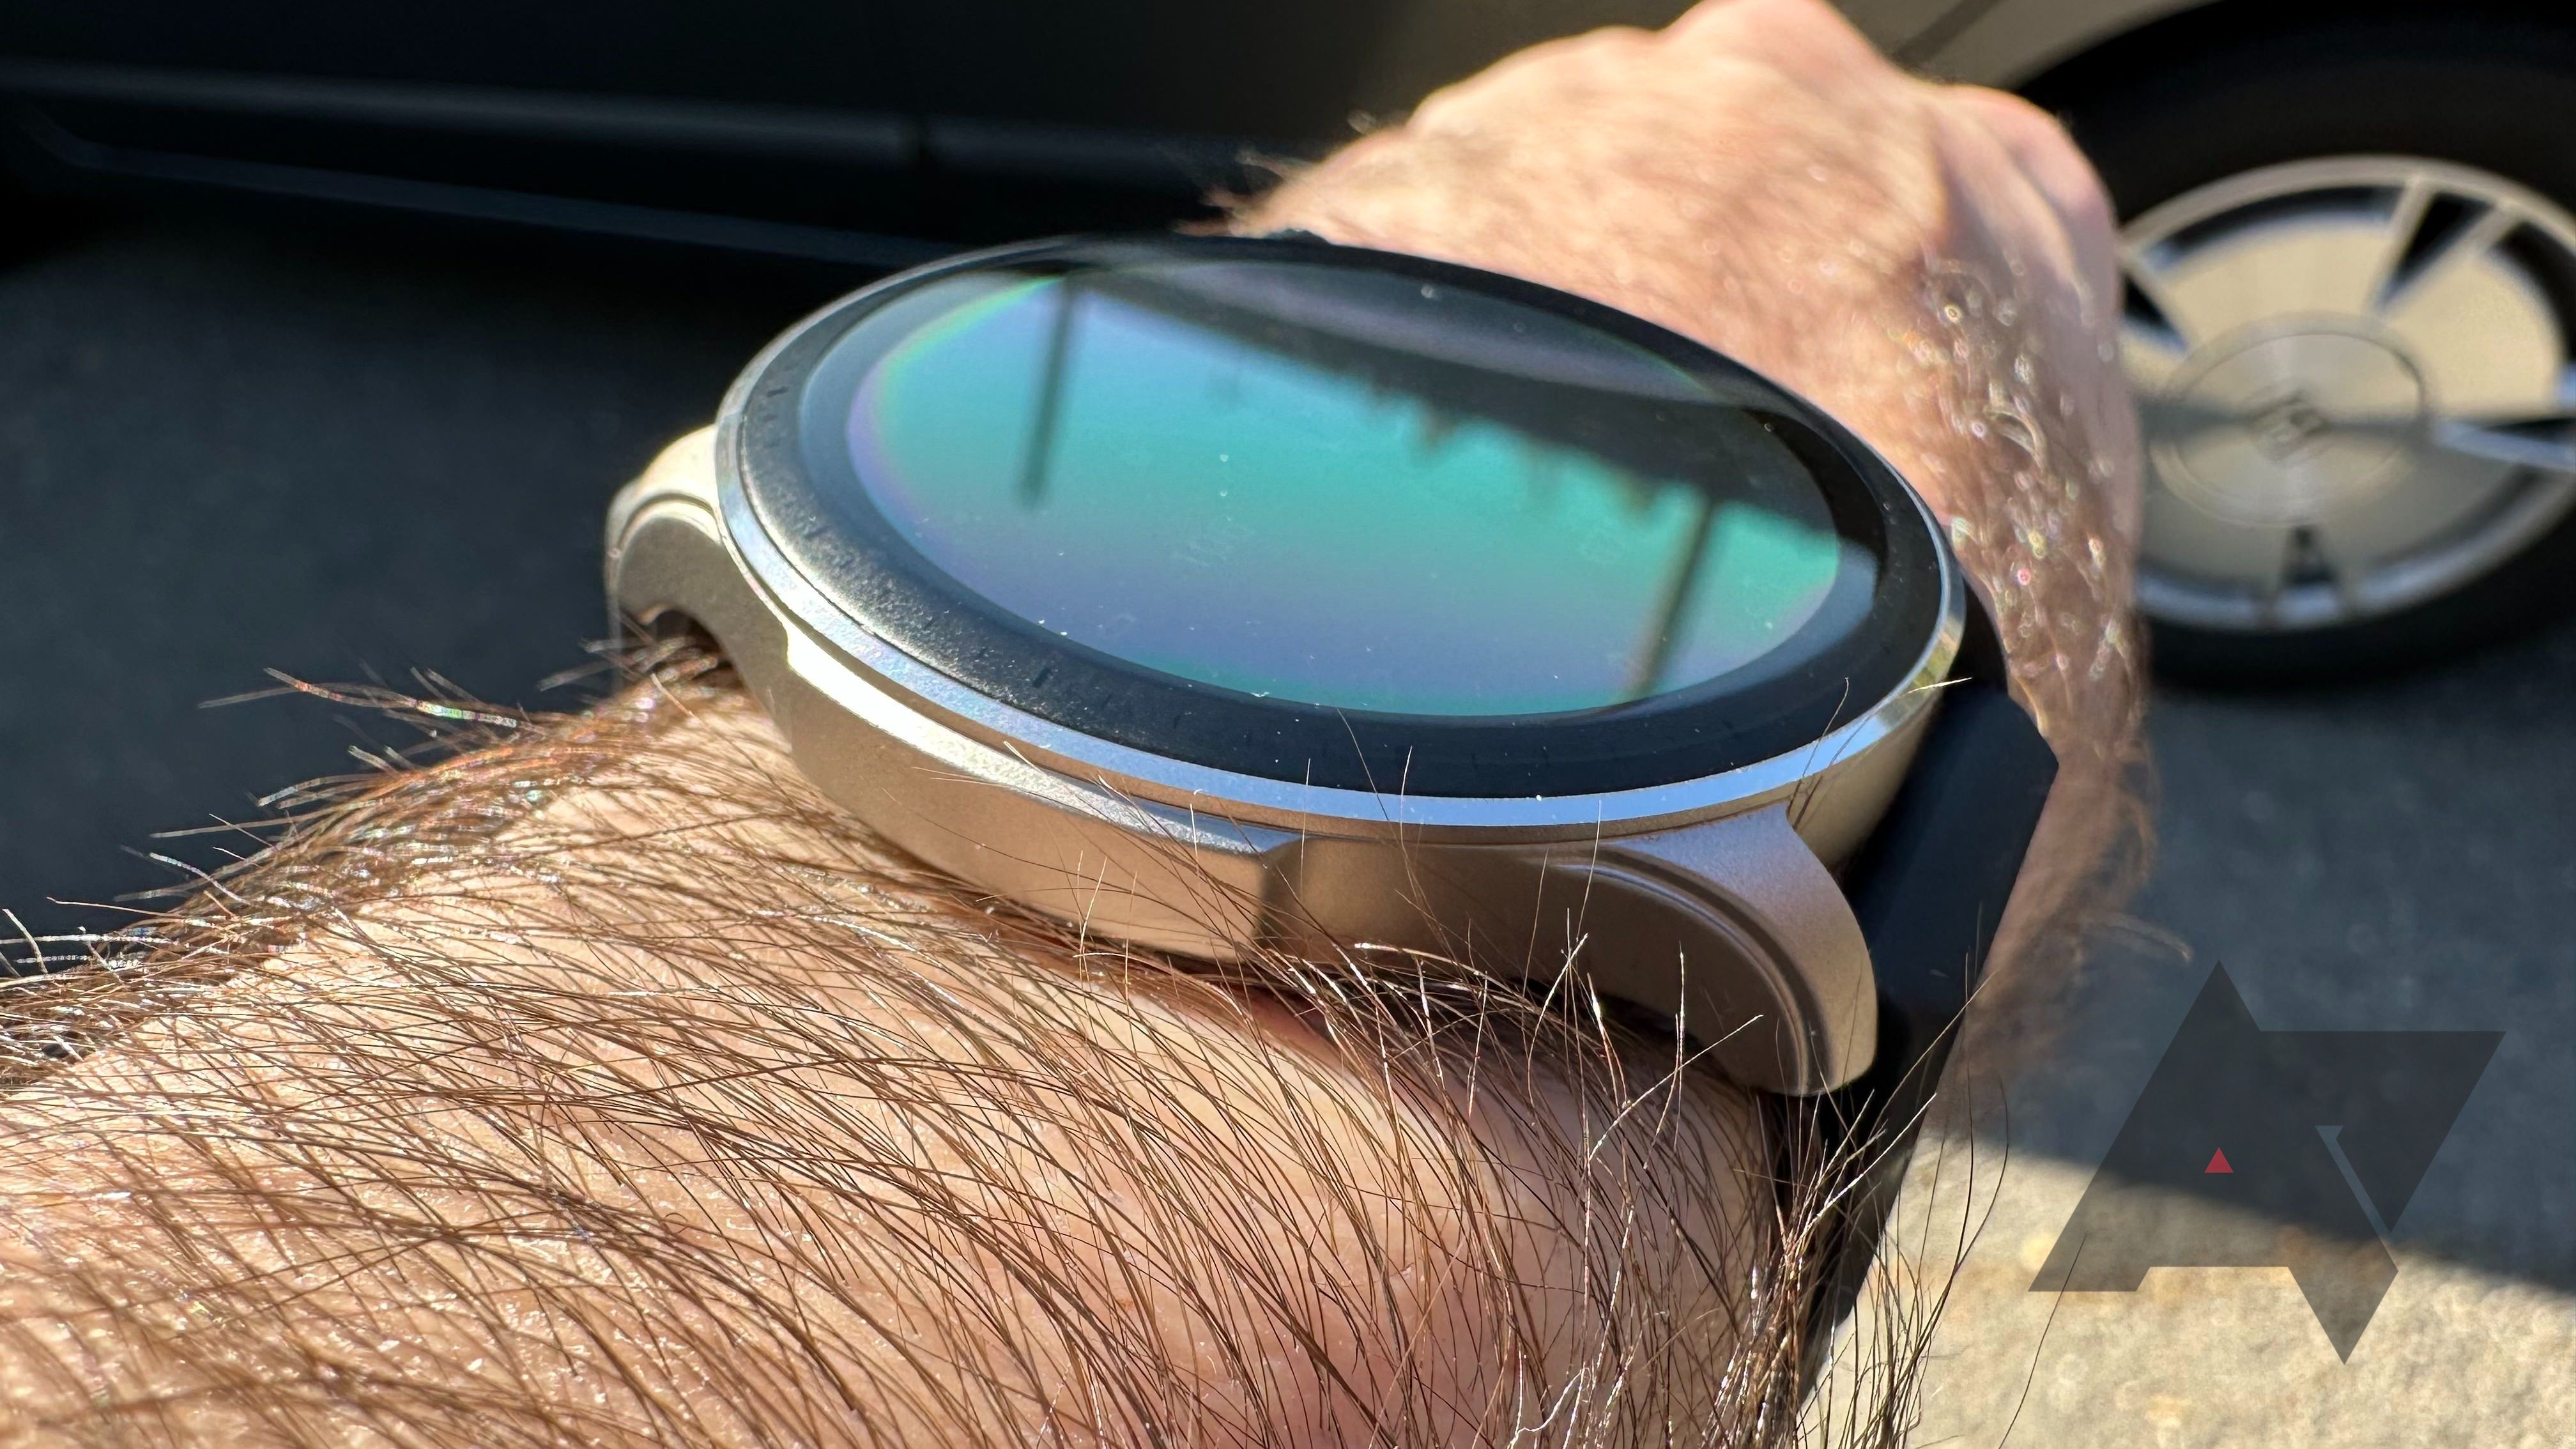 Amazfit GTR 4 hands-on review: An industry-first GPS system for $199